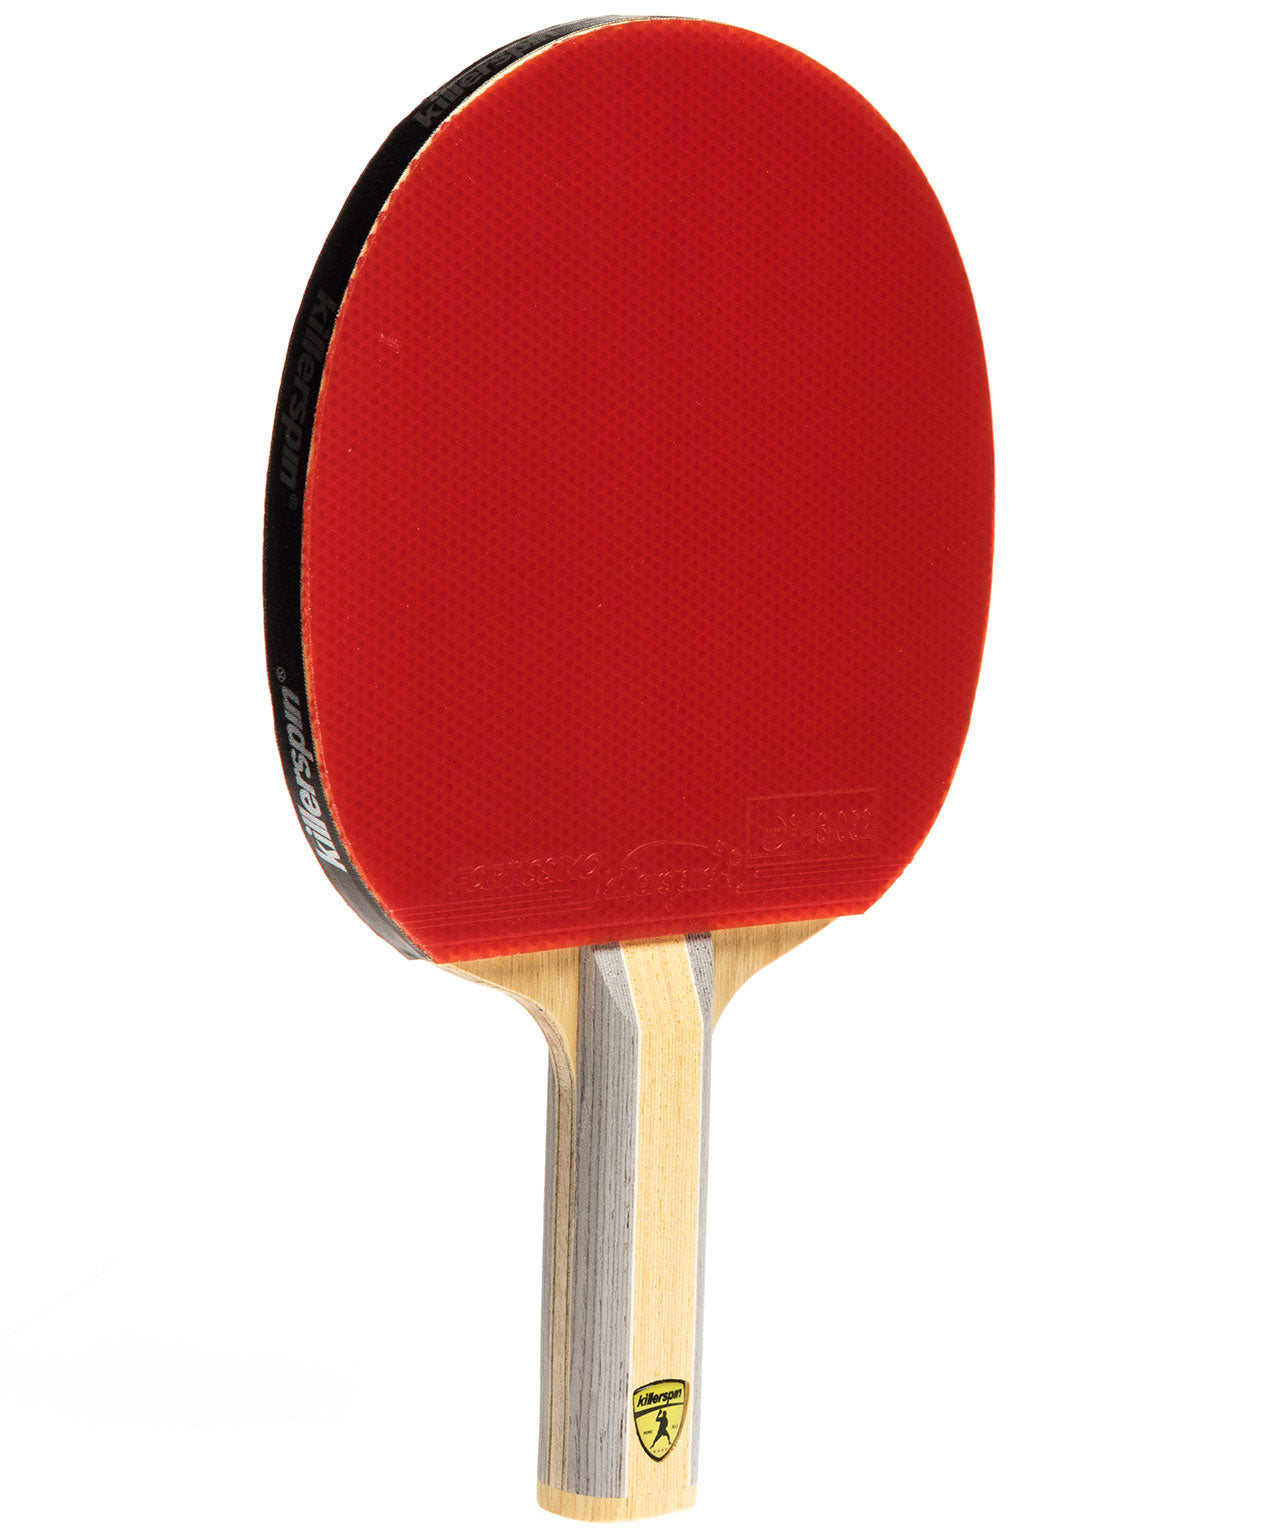 Killerspin Ping Pong Racquet Diamond CQ Premium - Straight Red Fortissimo Rubber